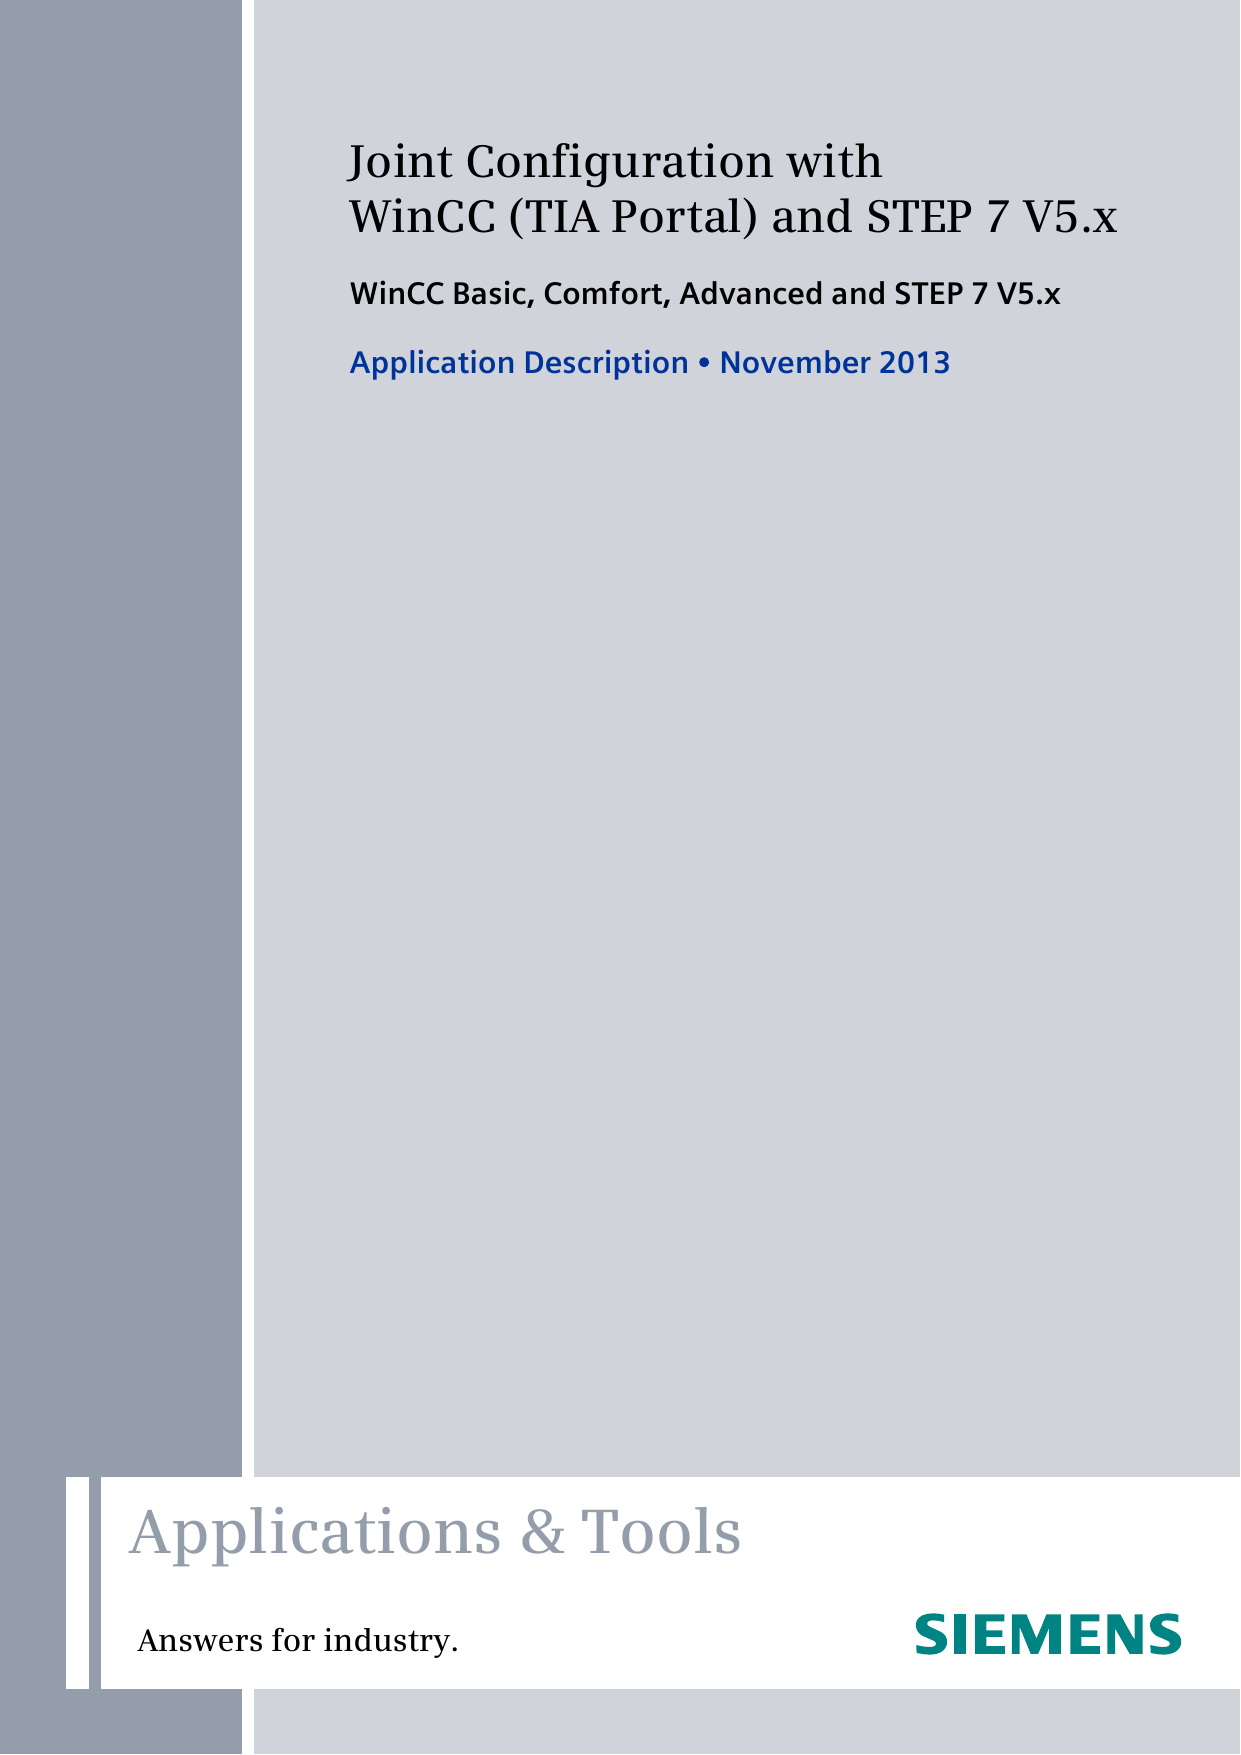 wincc flexible 2008 sp1 to sp3 type size issues simatic